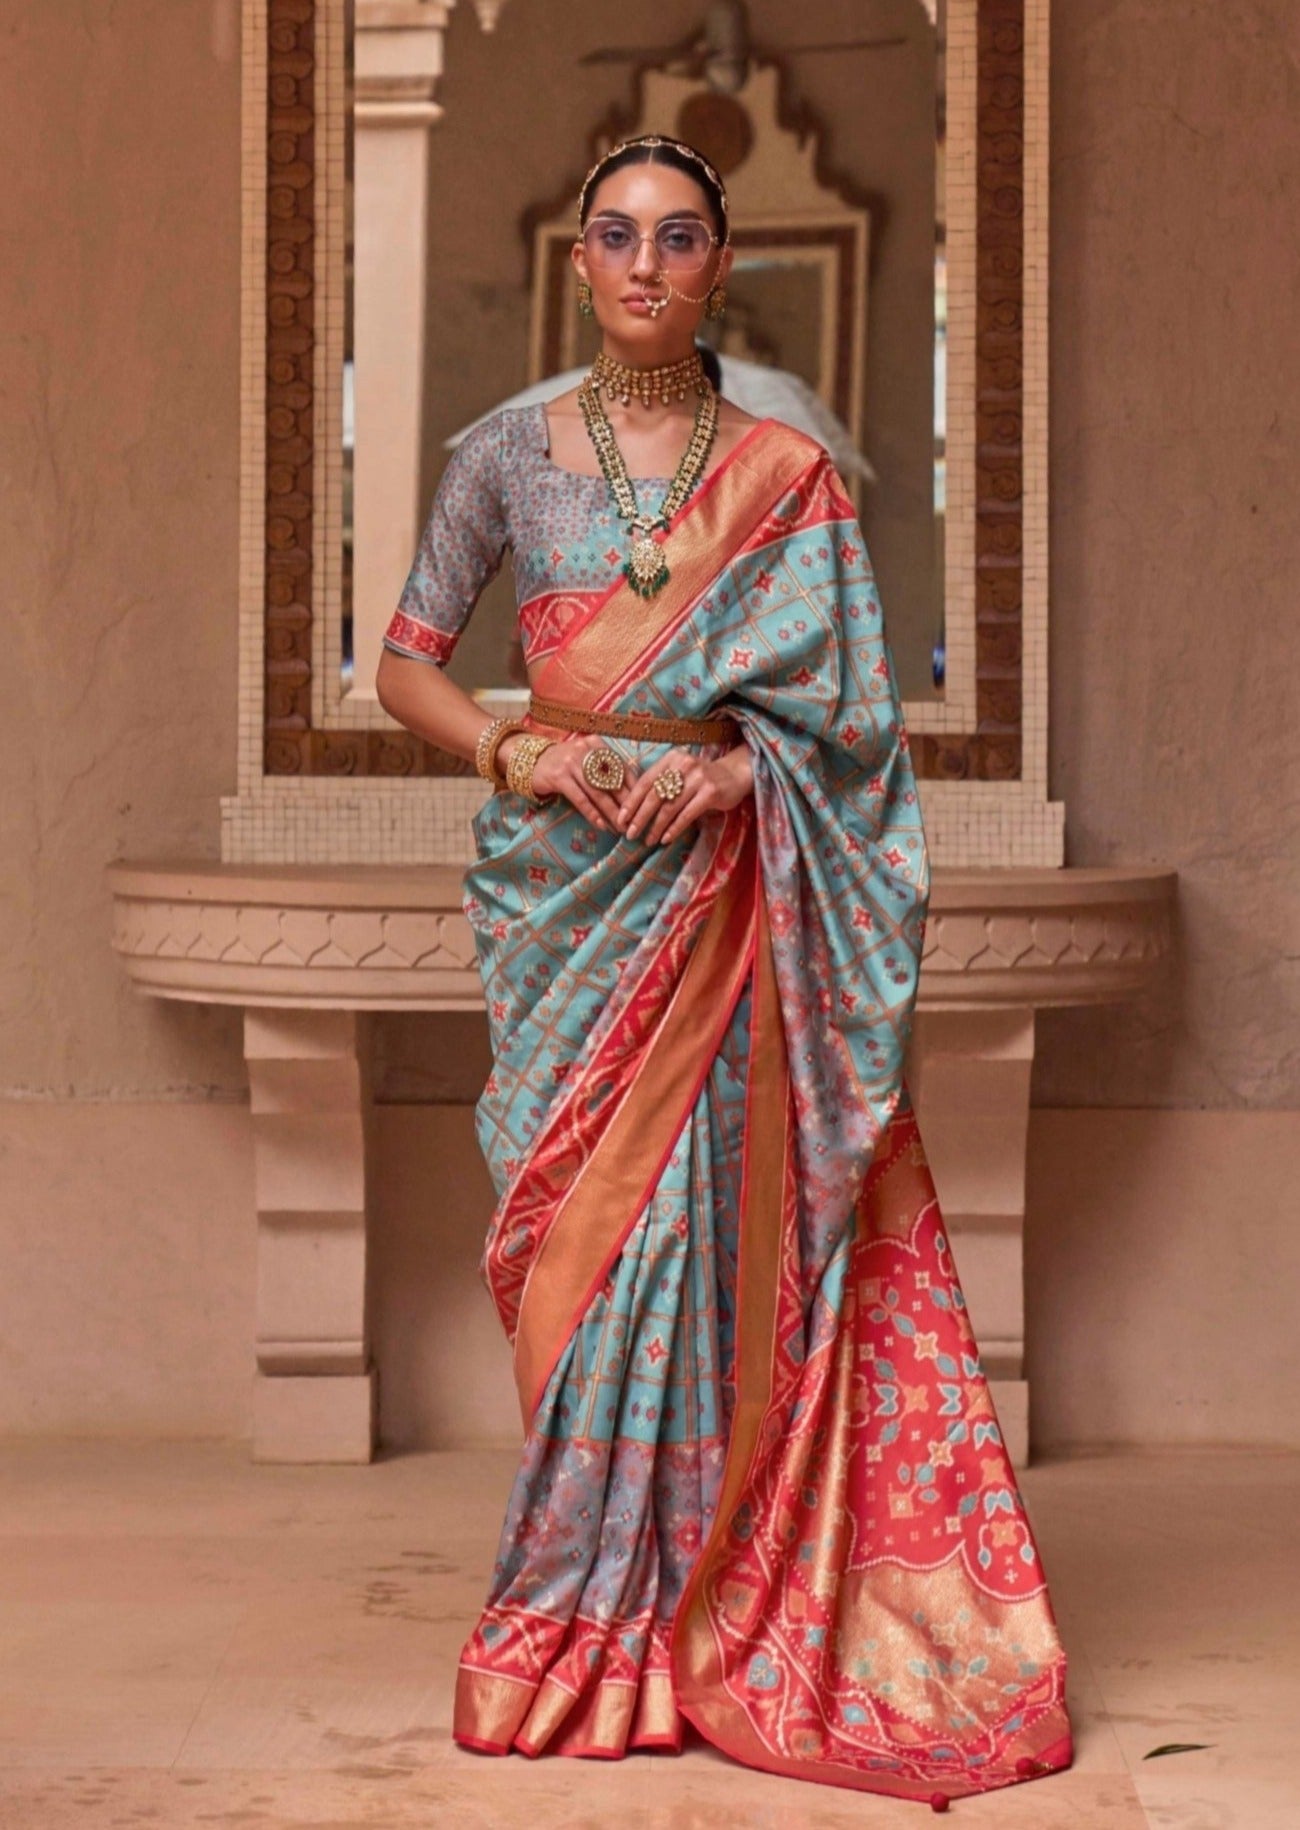 Woman standing in light blue double-ikkat-patola-saree